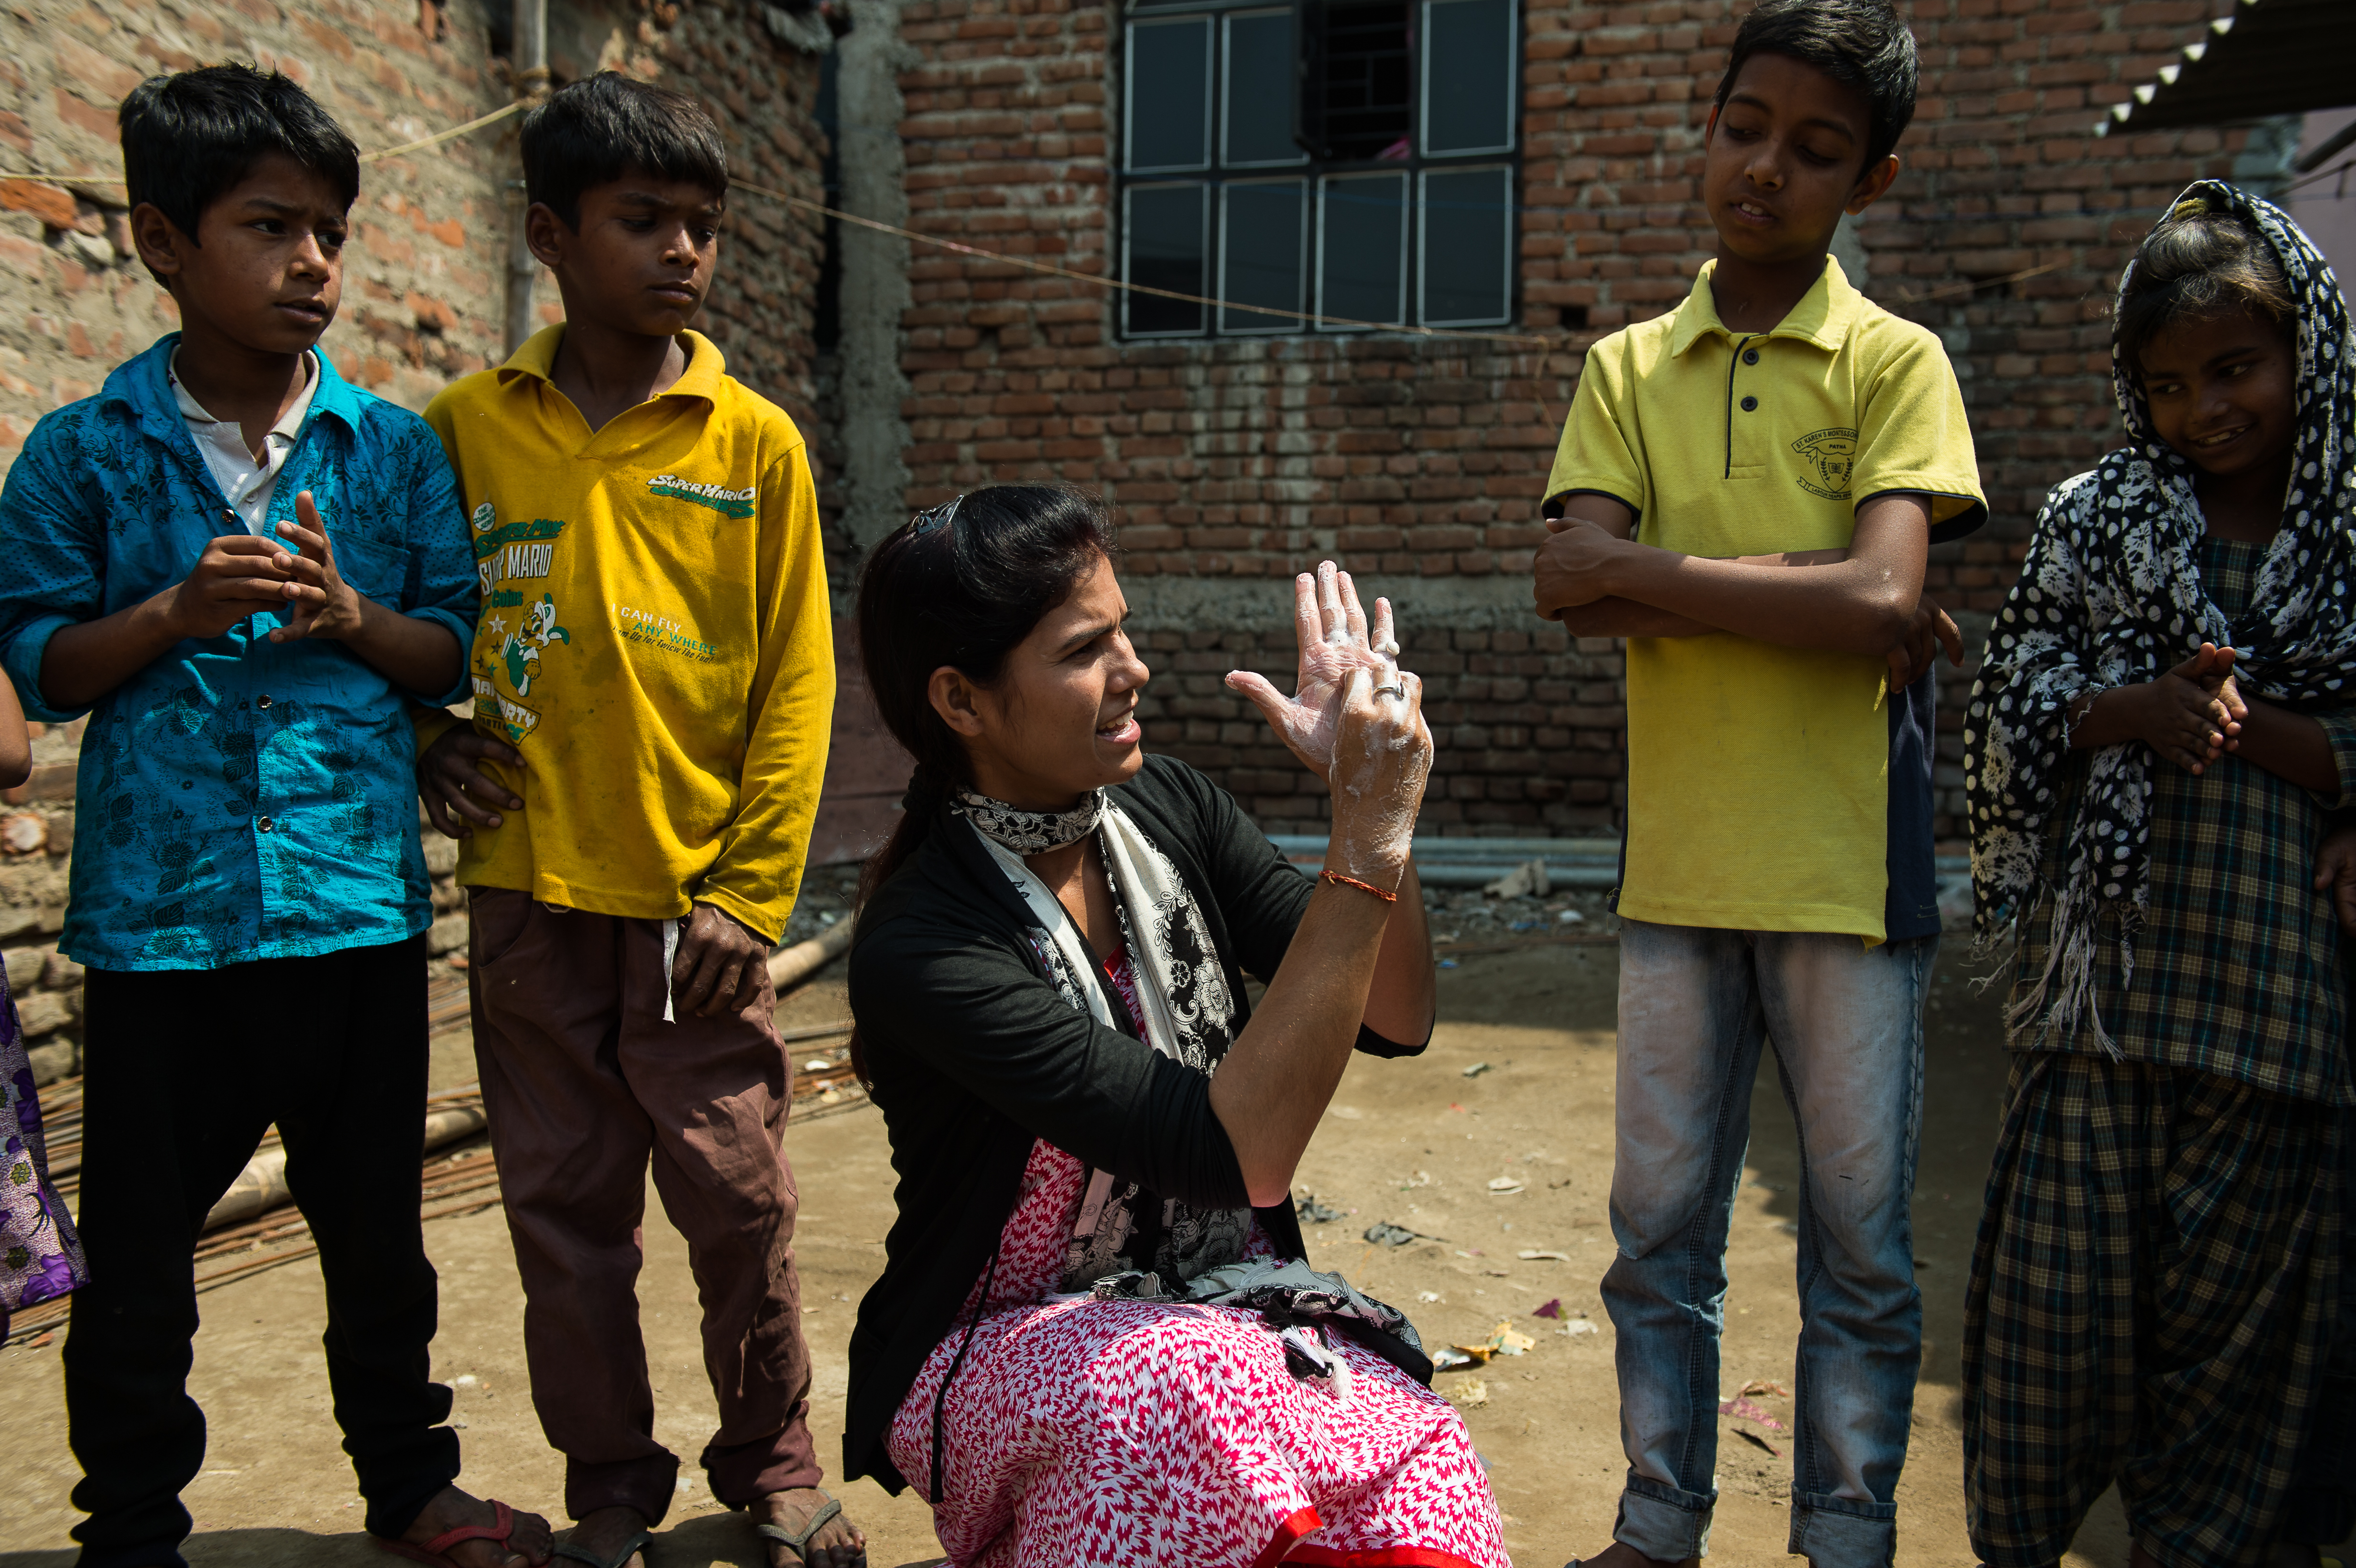 Female community health volunteer in India demonstrates handwashing to a group of children.